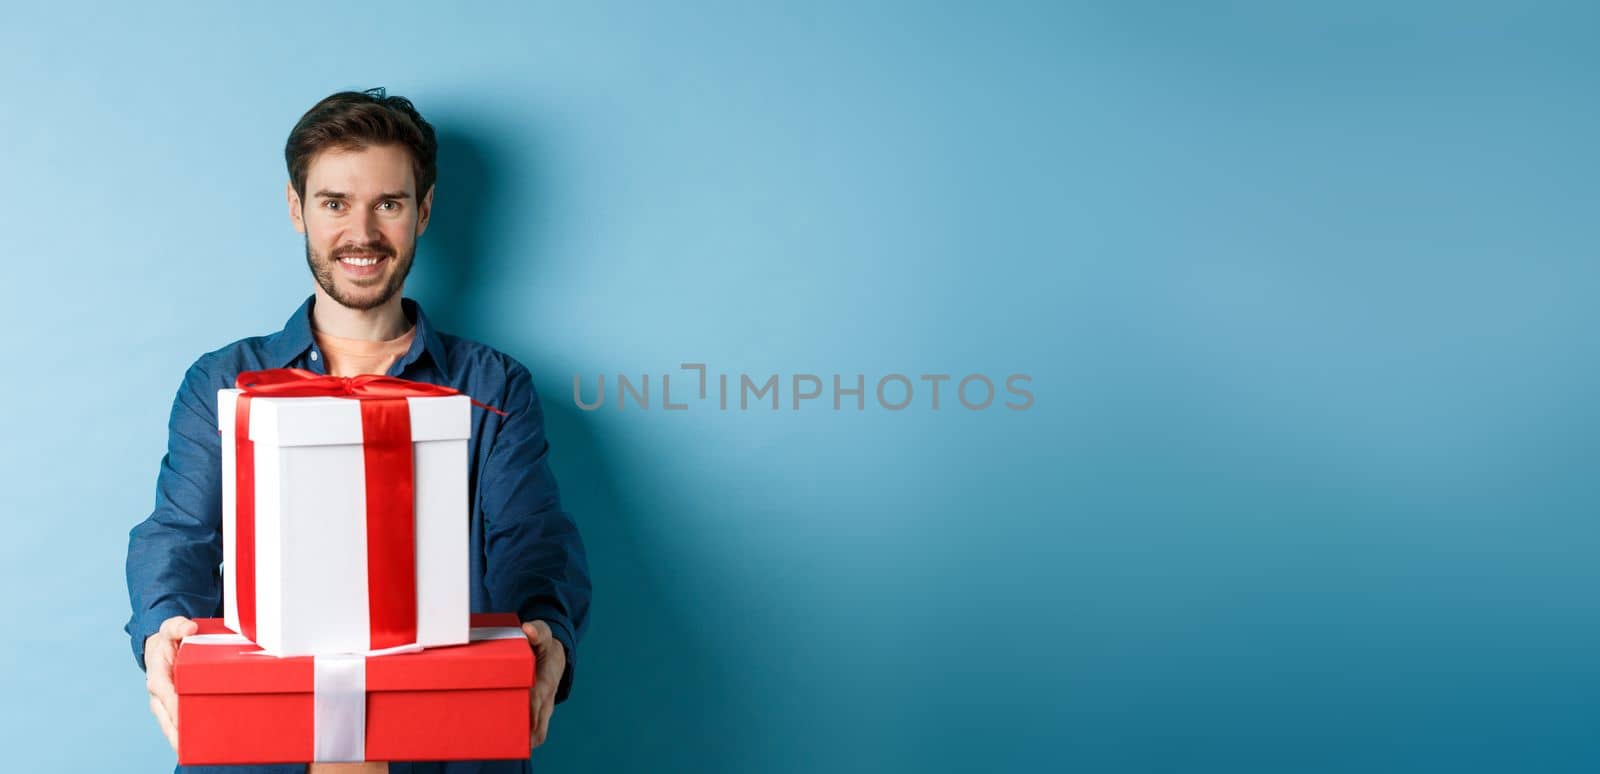 Happy valentines day. Handsome man giving girlfriend presents, holding gift boxes and smiling, standing over blue background.